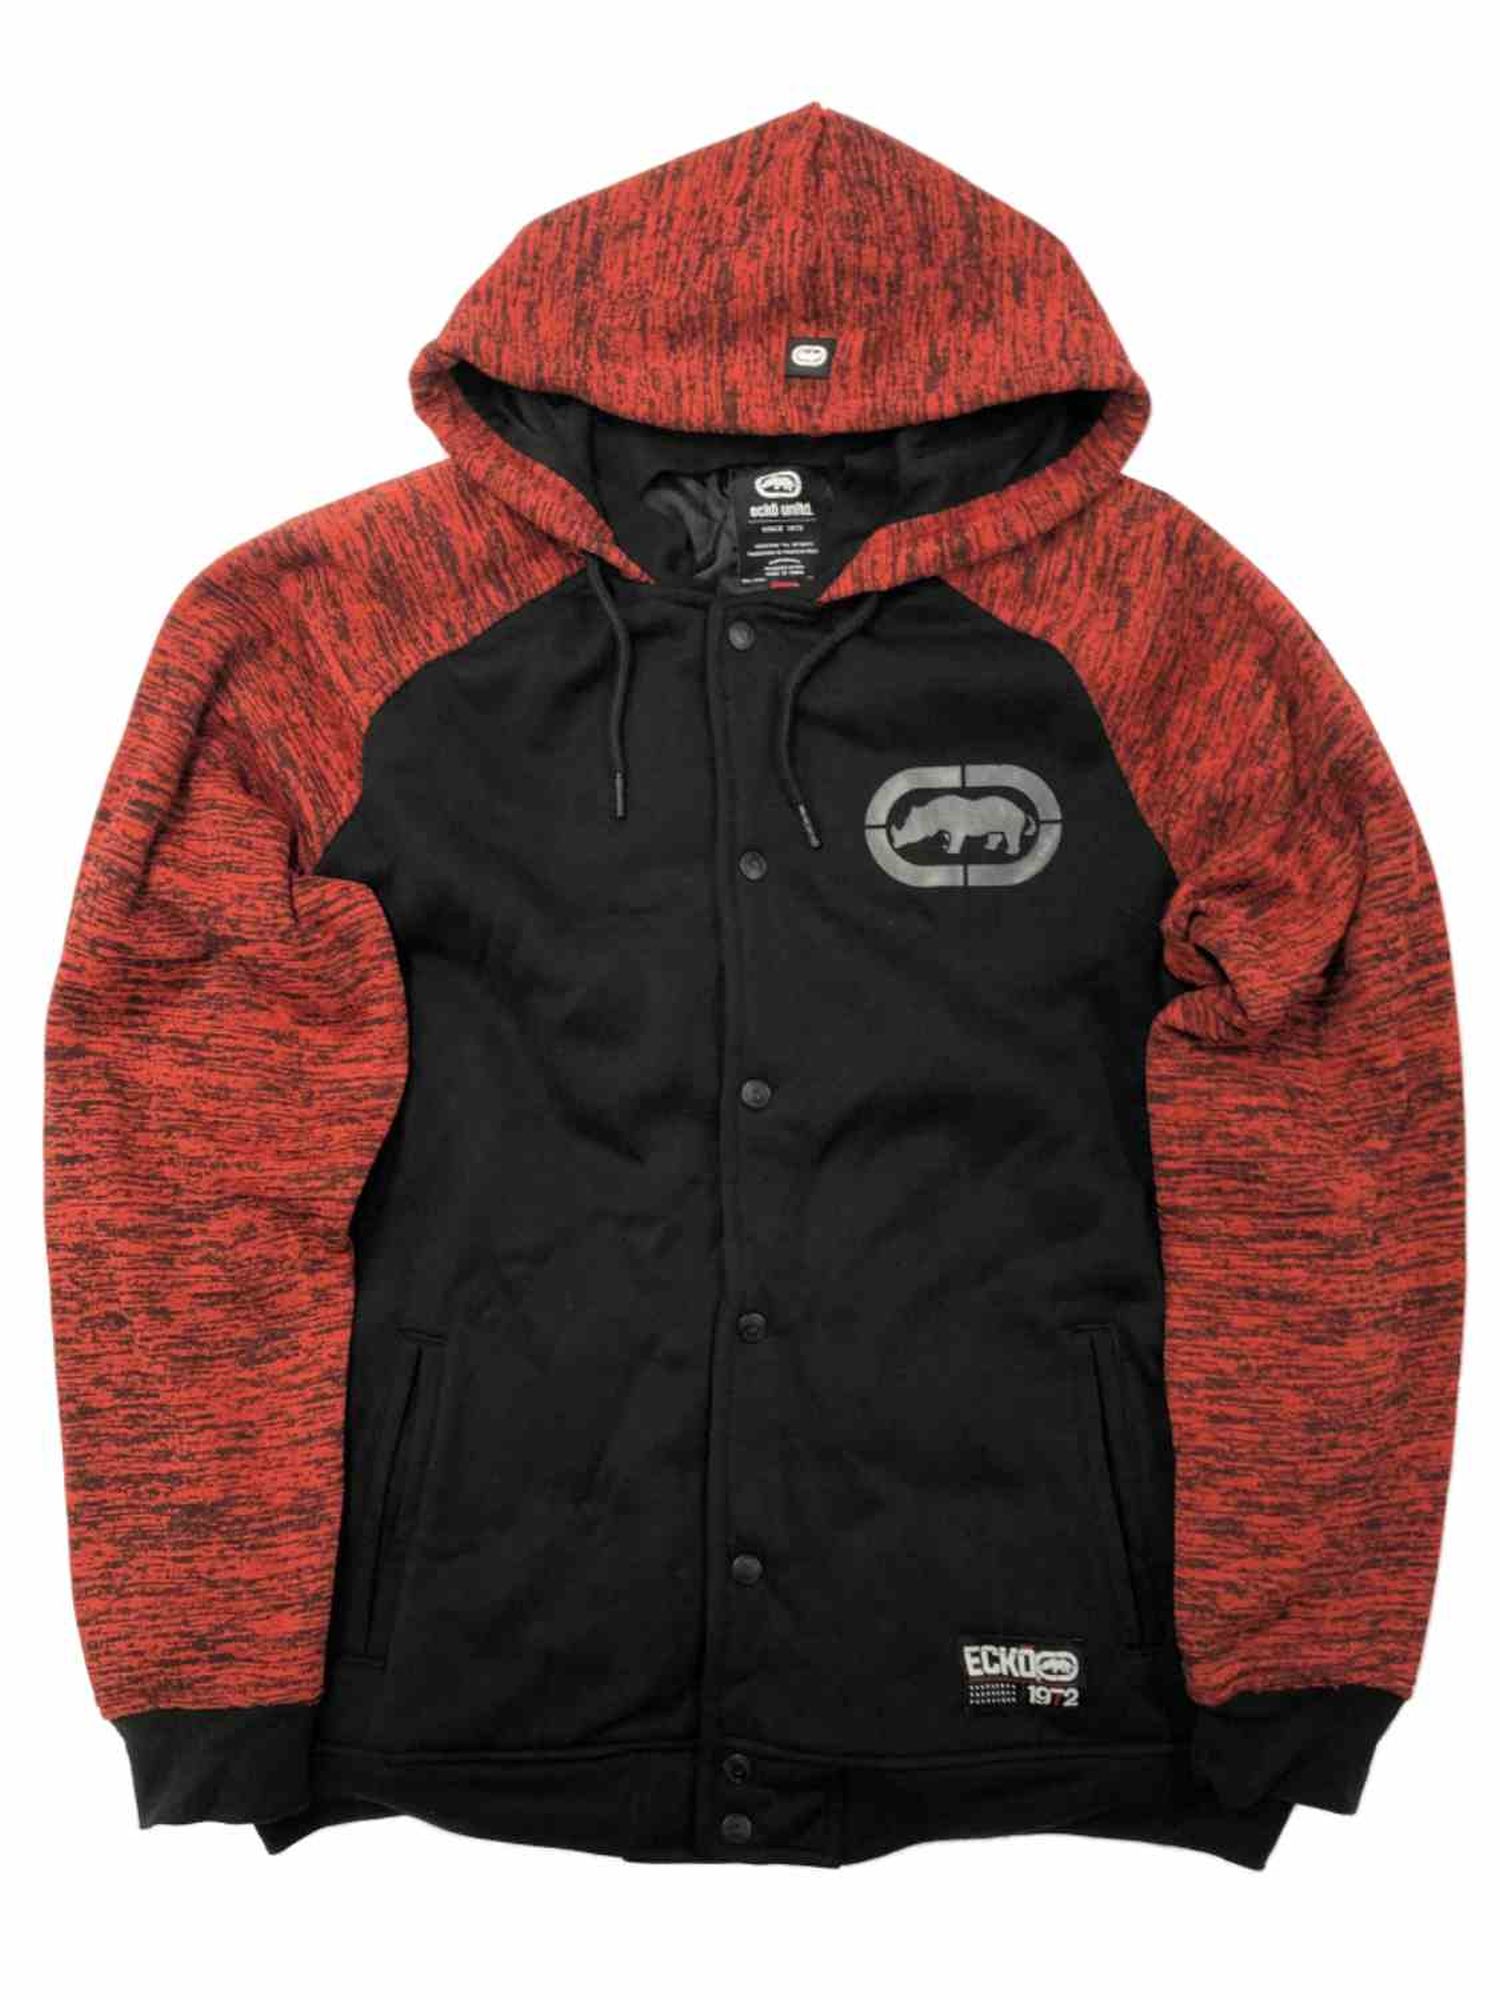 Ecko Mens Black & Red Hoodie Snap Front Jacket Small - image 1 of 1